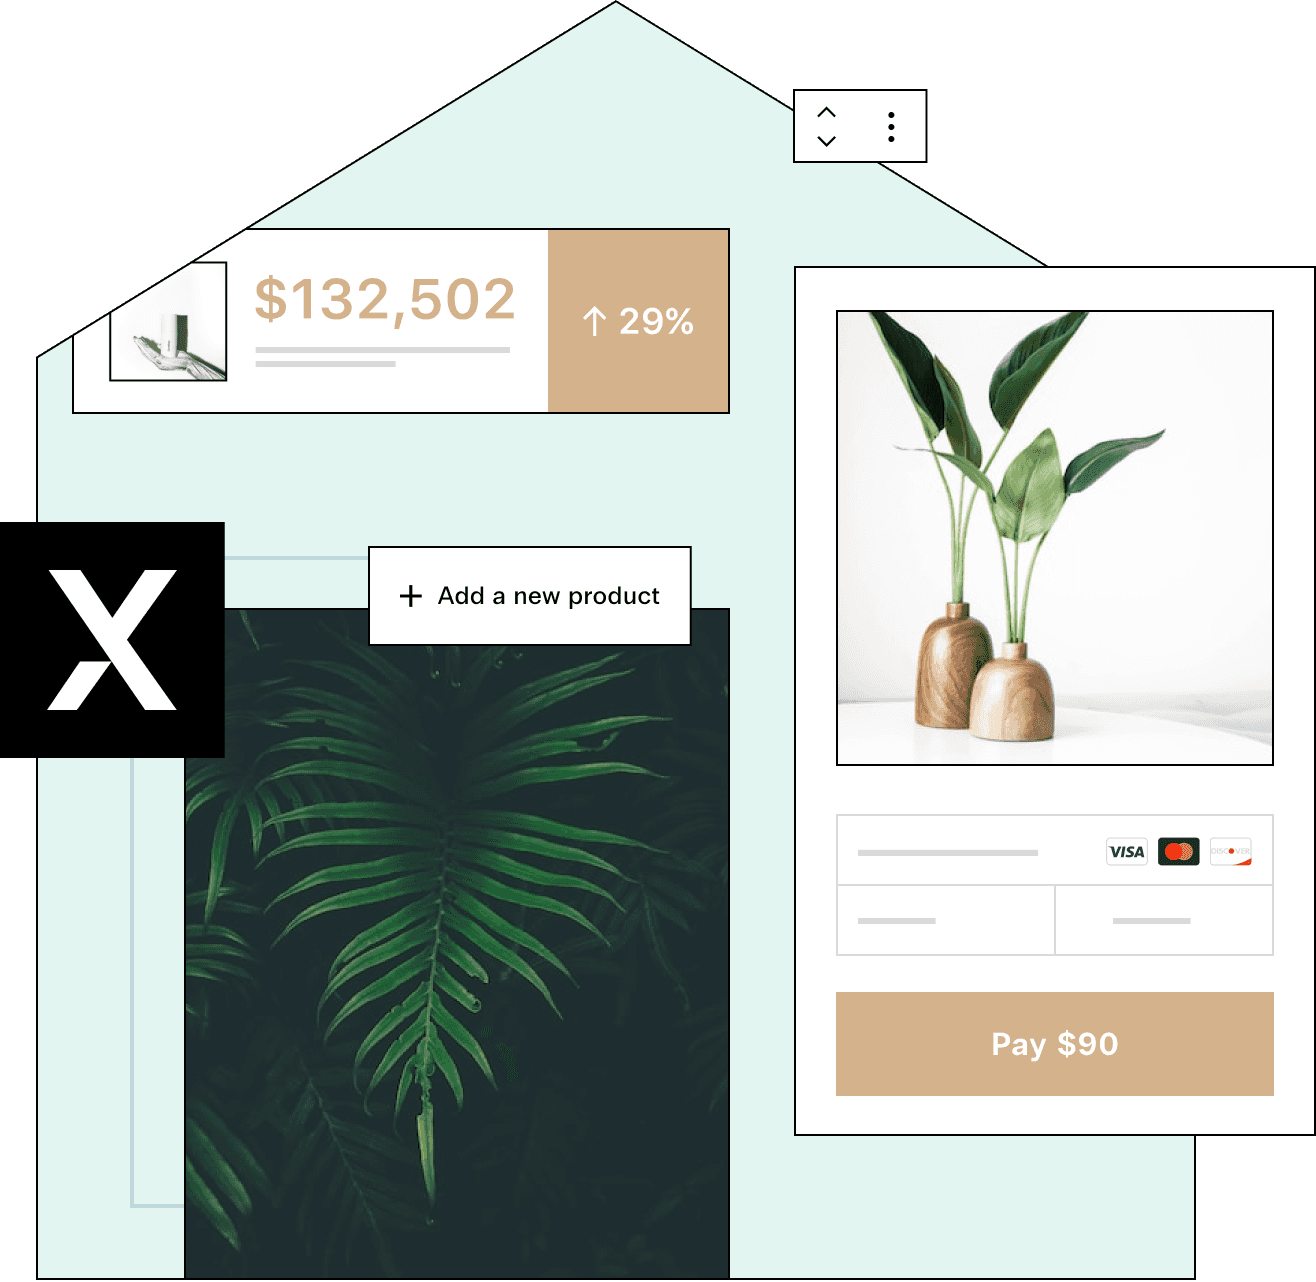 Snapshots of an online store with a calming aesthetic selling artistic plants and pots for $90, revenue shows 29% growth